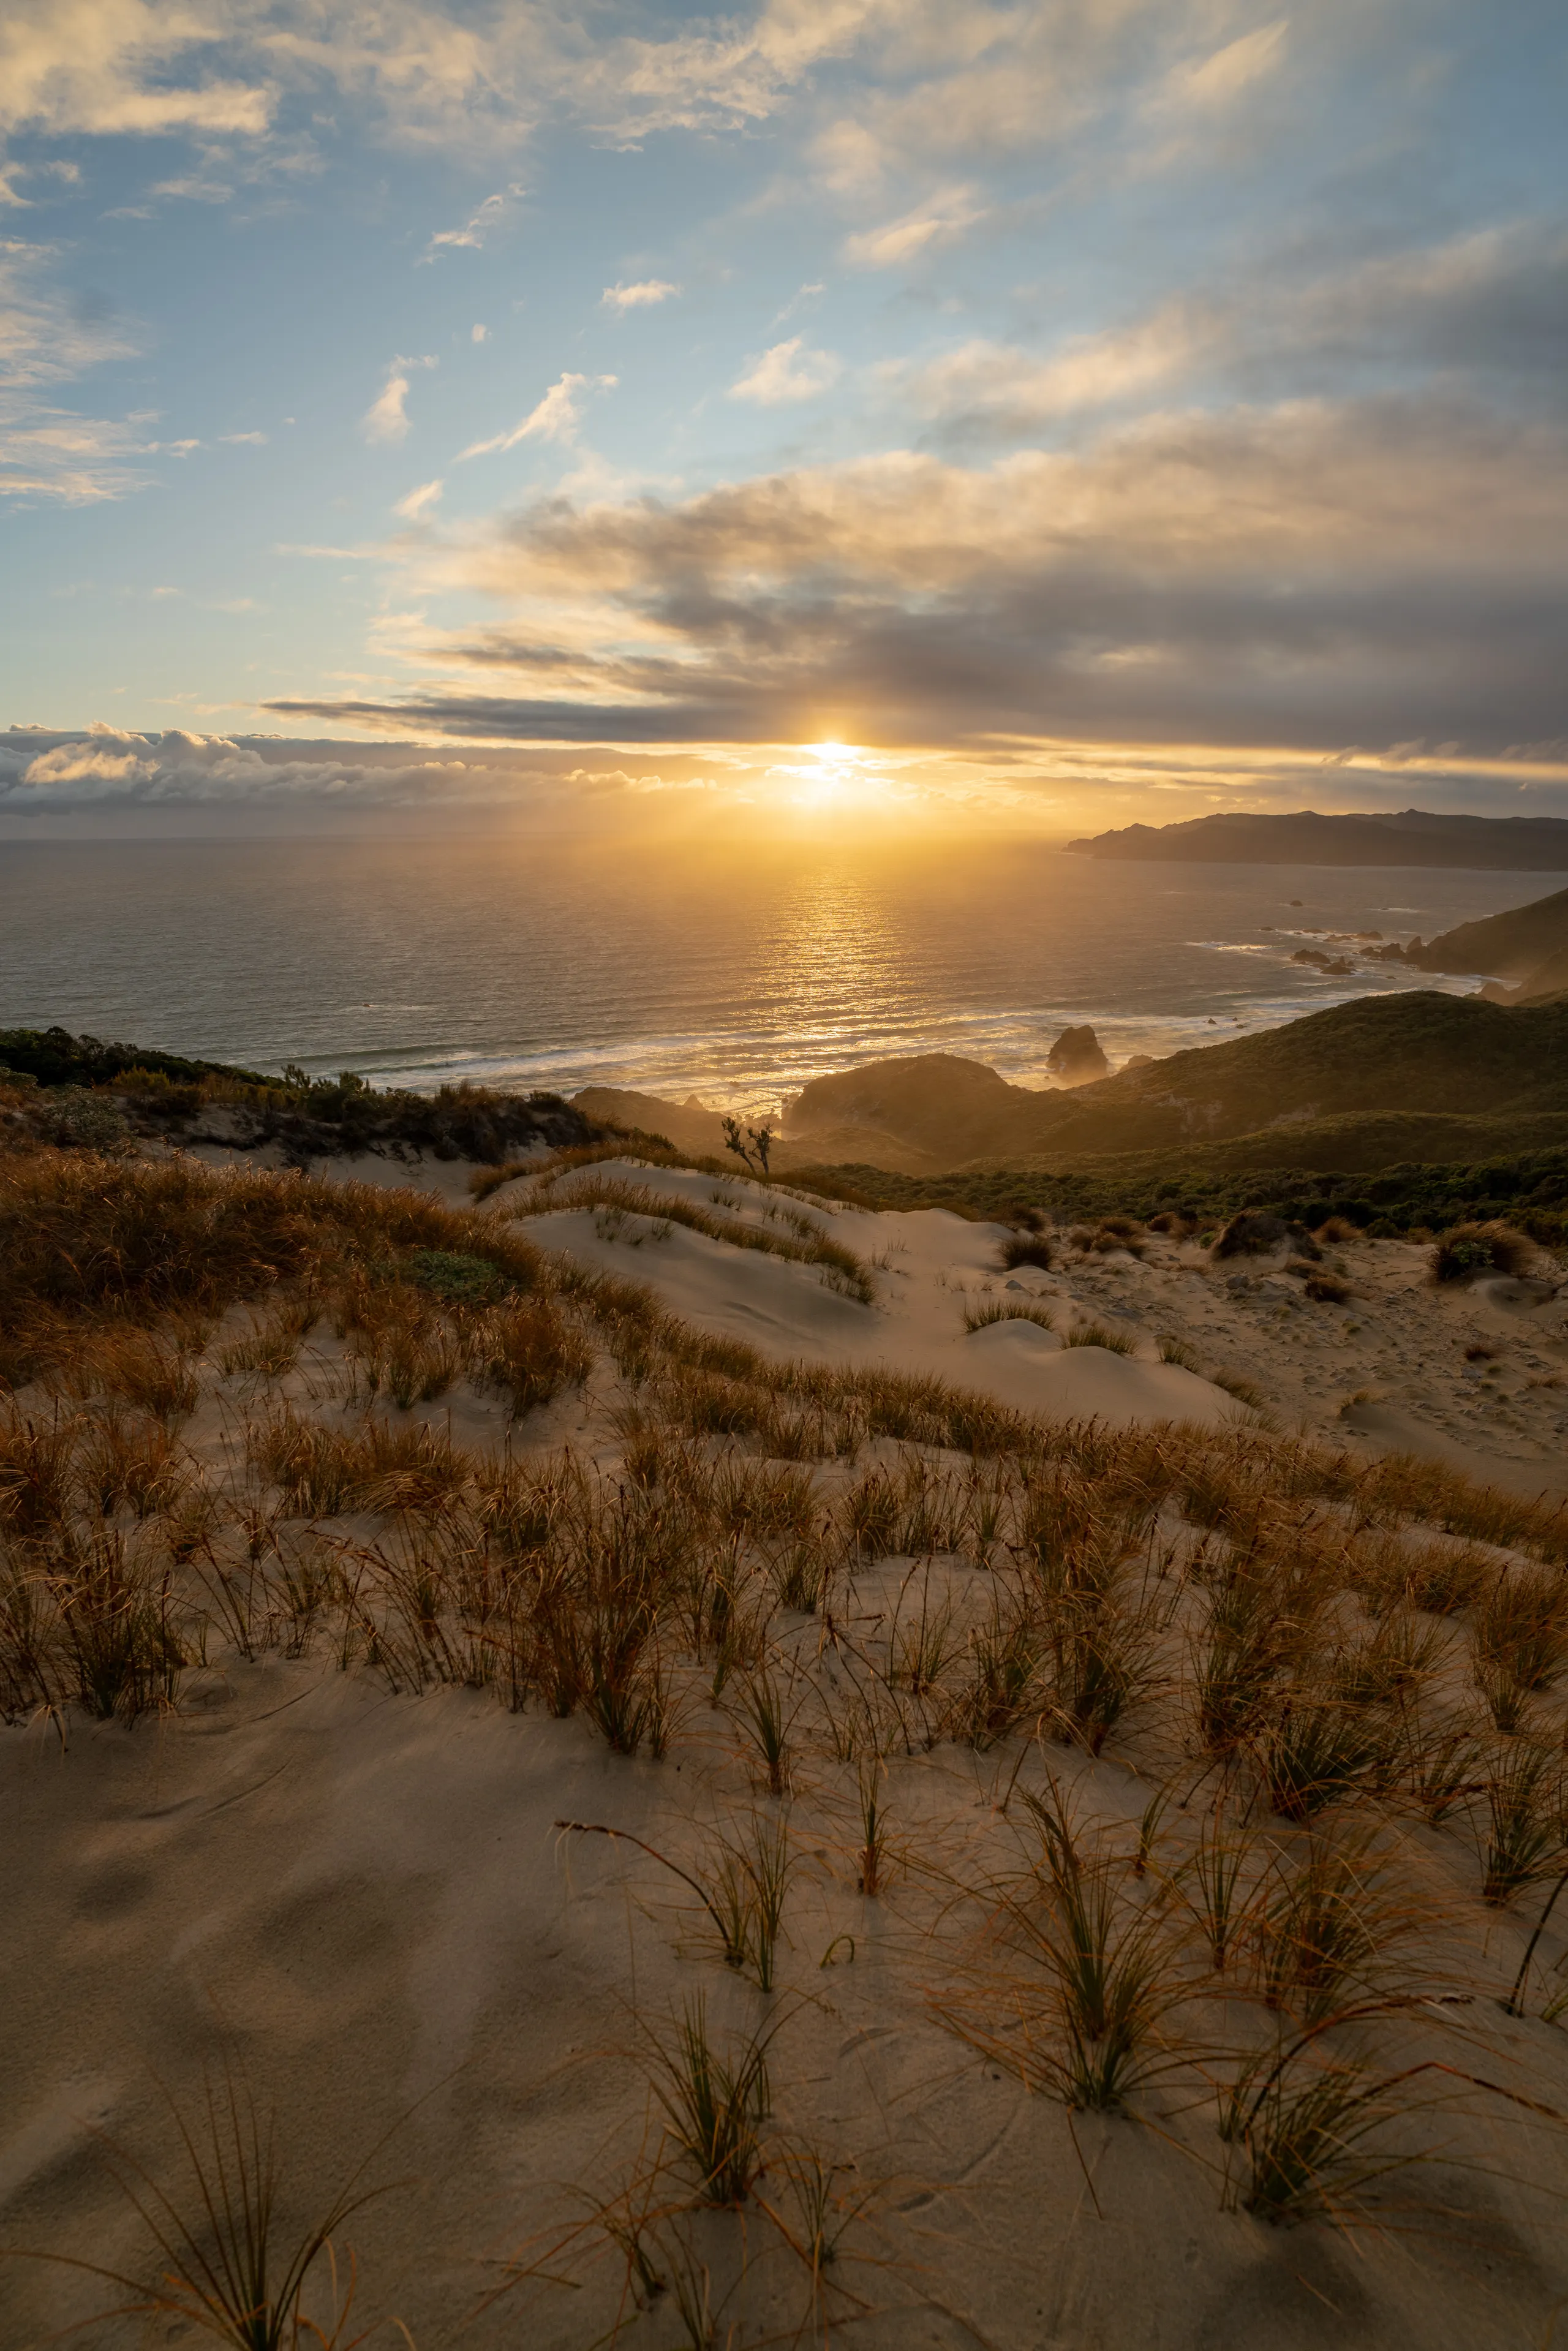 Sunset from the top of the Hellfire sand dune with Codfish Island / Whenua Hou visible in the background